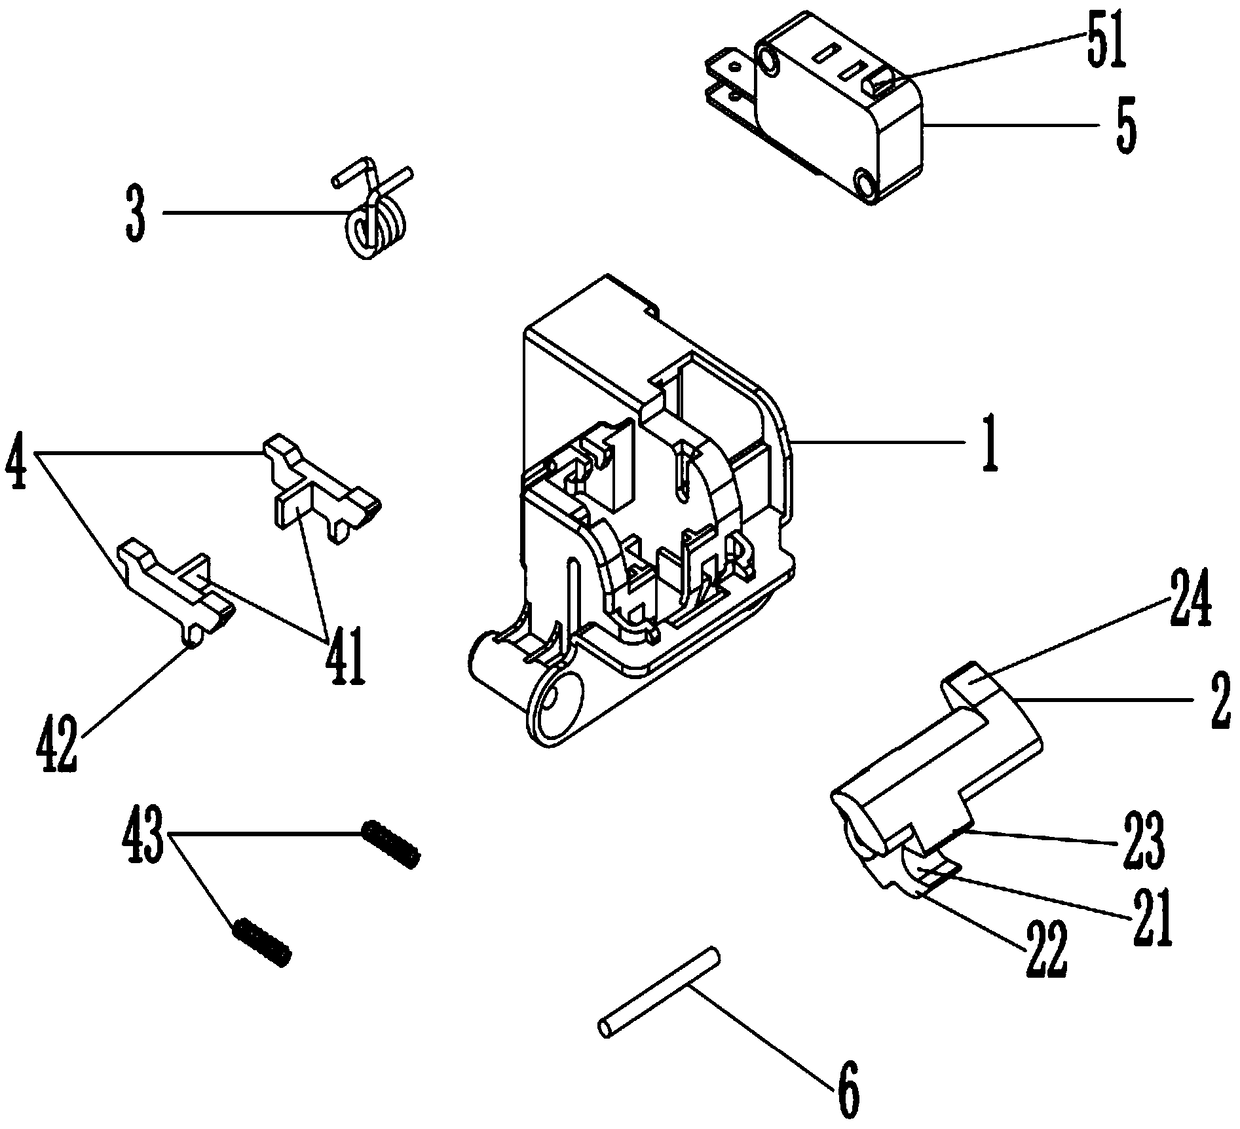 Door lock structure and electrical appliance equipment